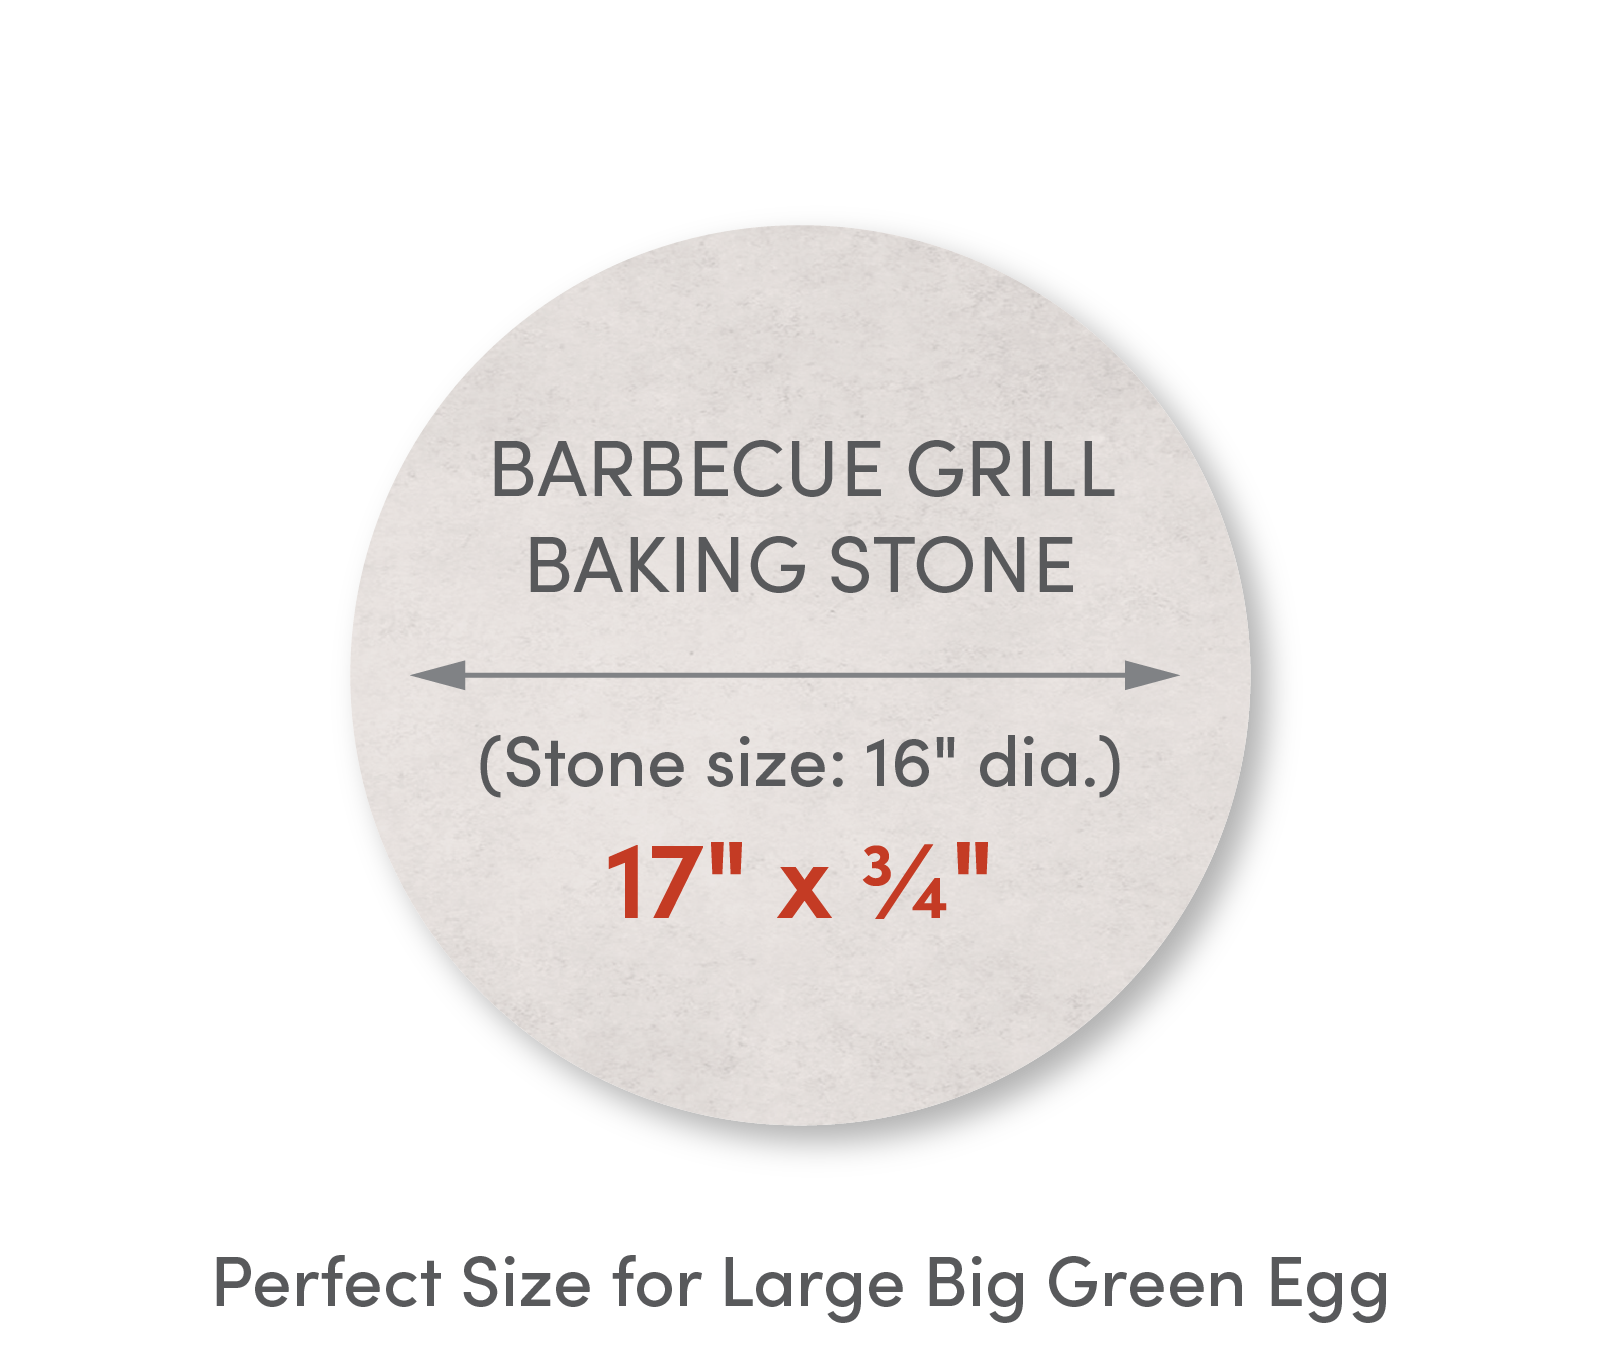 Home Barbecue Grill Baking Stone 17" Diameter